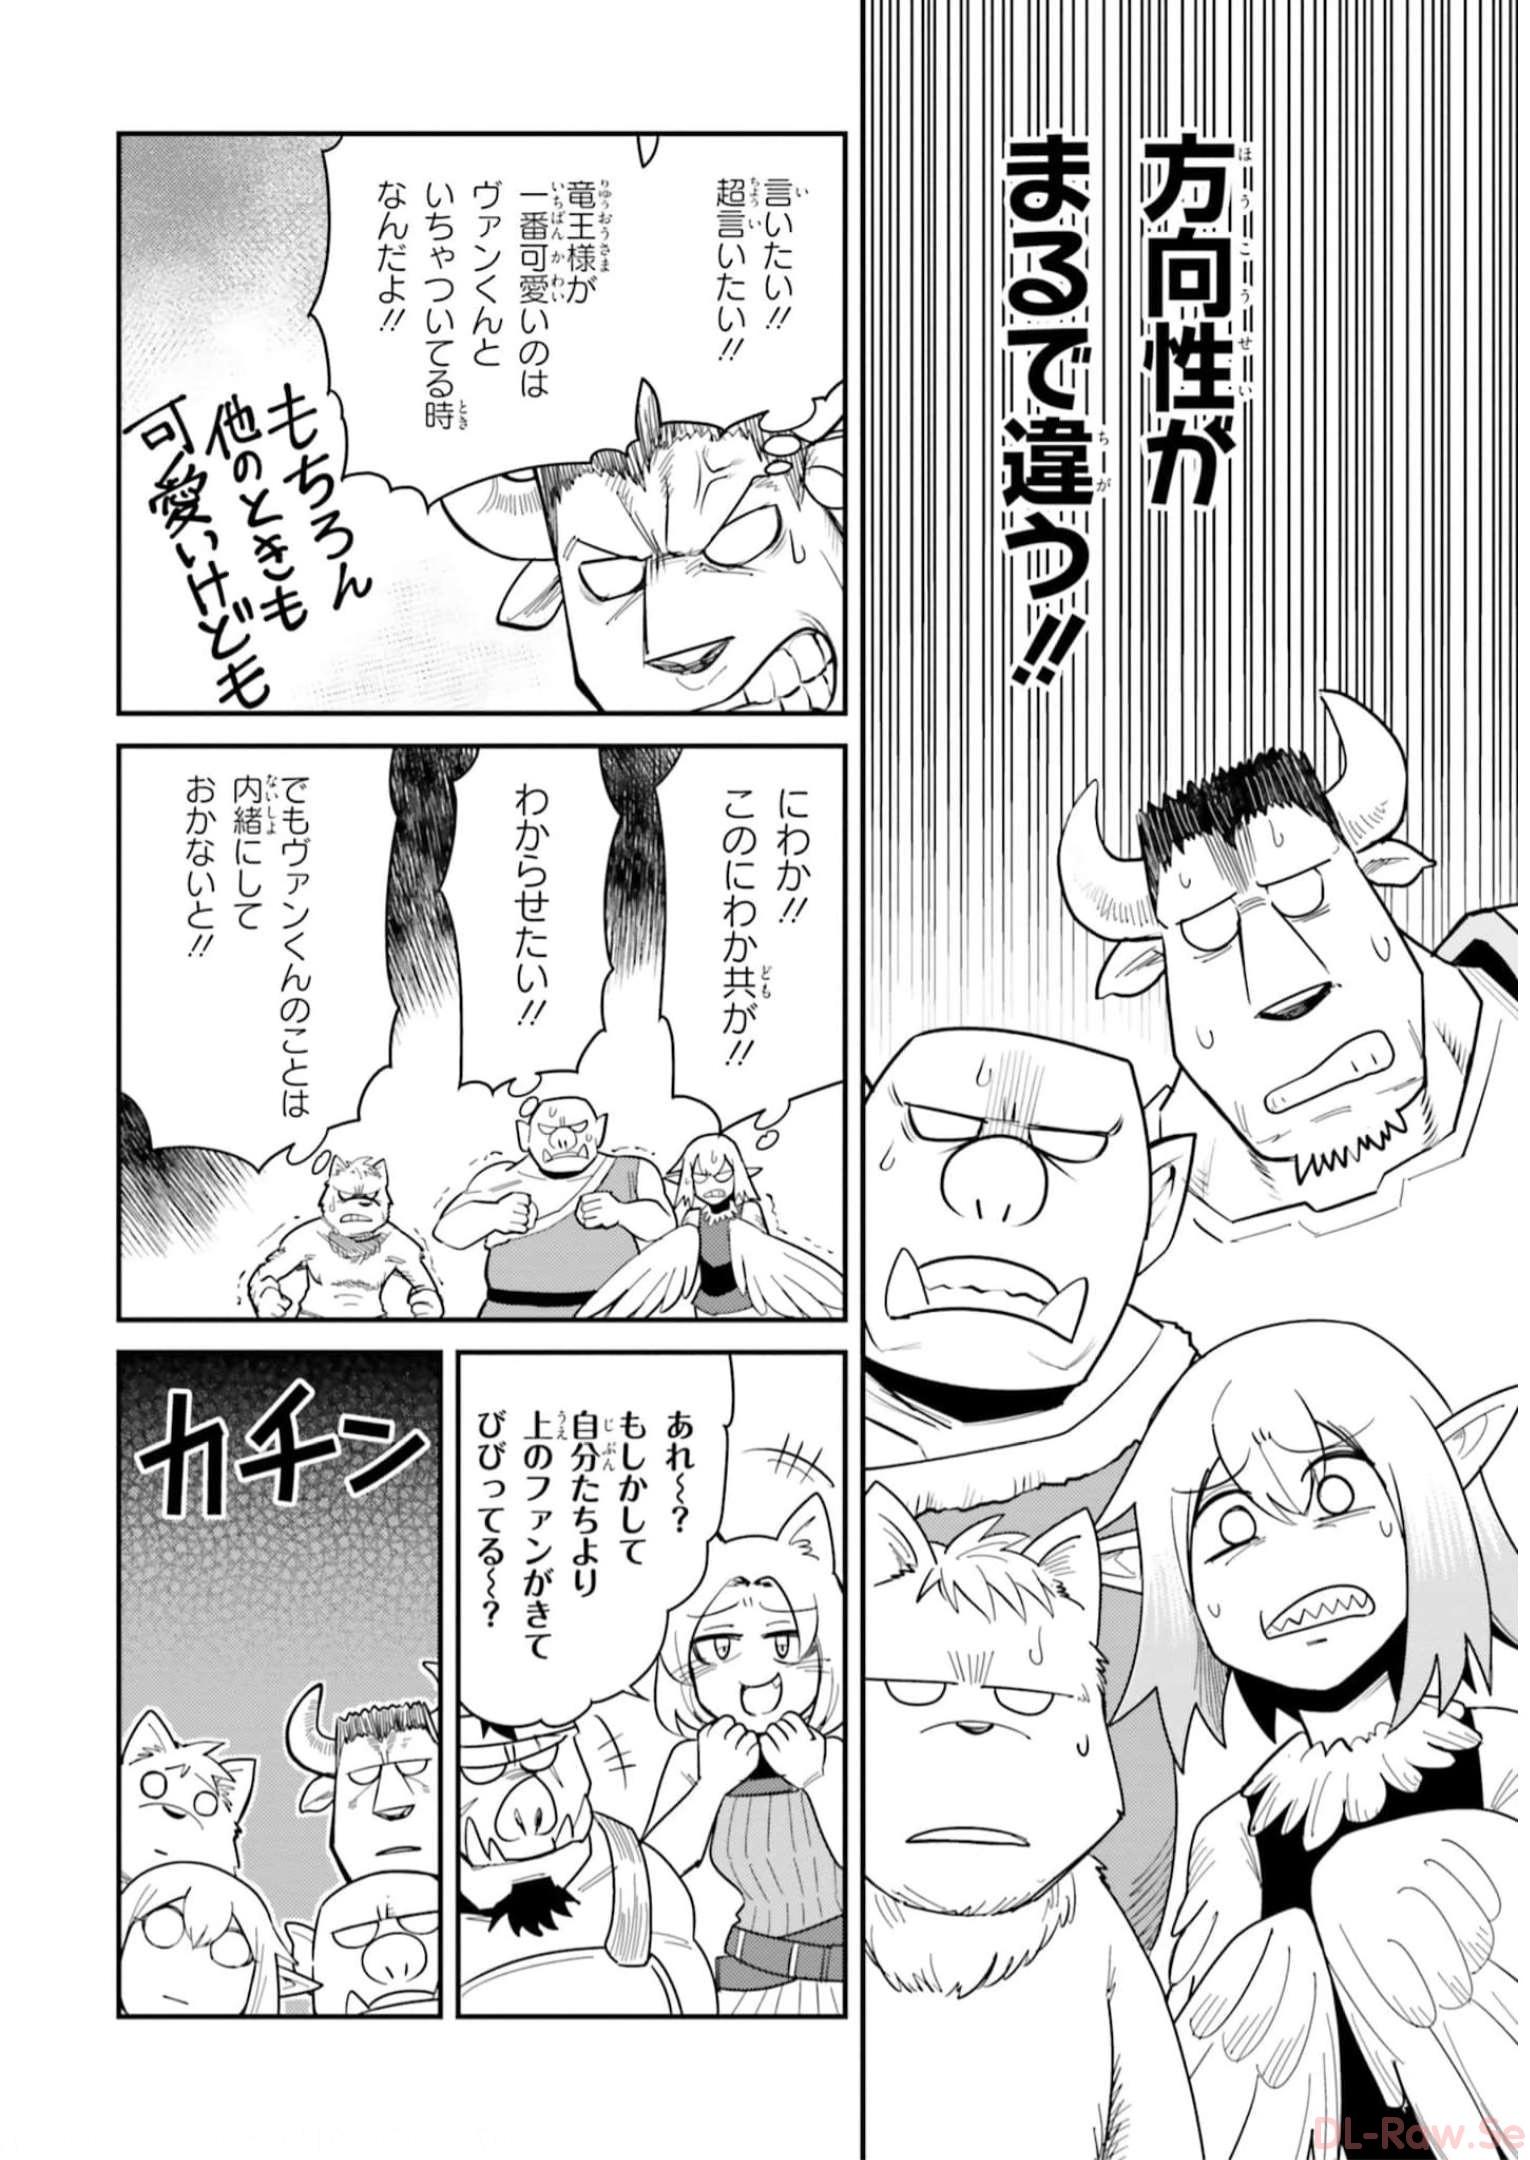 Dungeon Friends Forever Dungeon's Childhood Friend ダンジョンの幼なじみ 第18話 - Page 14